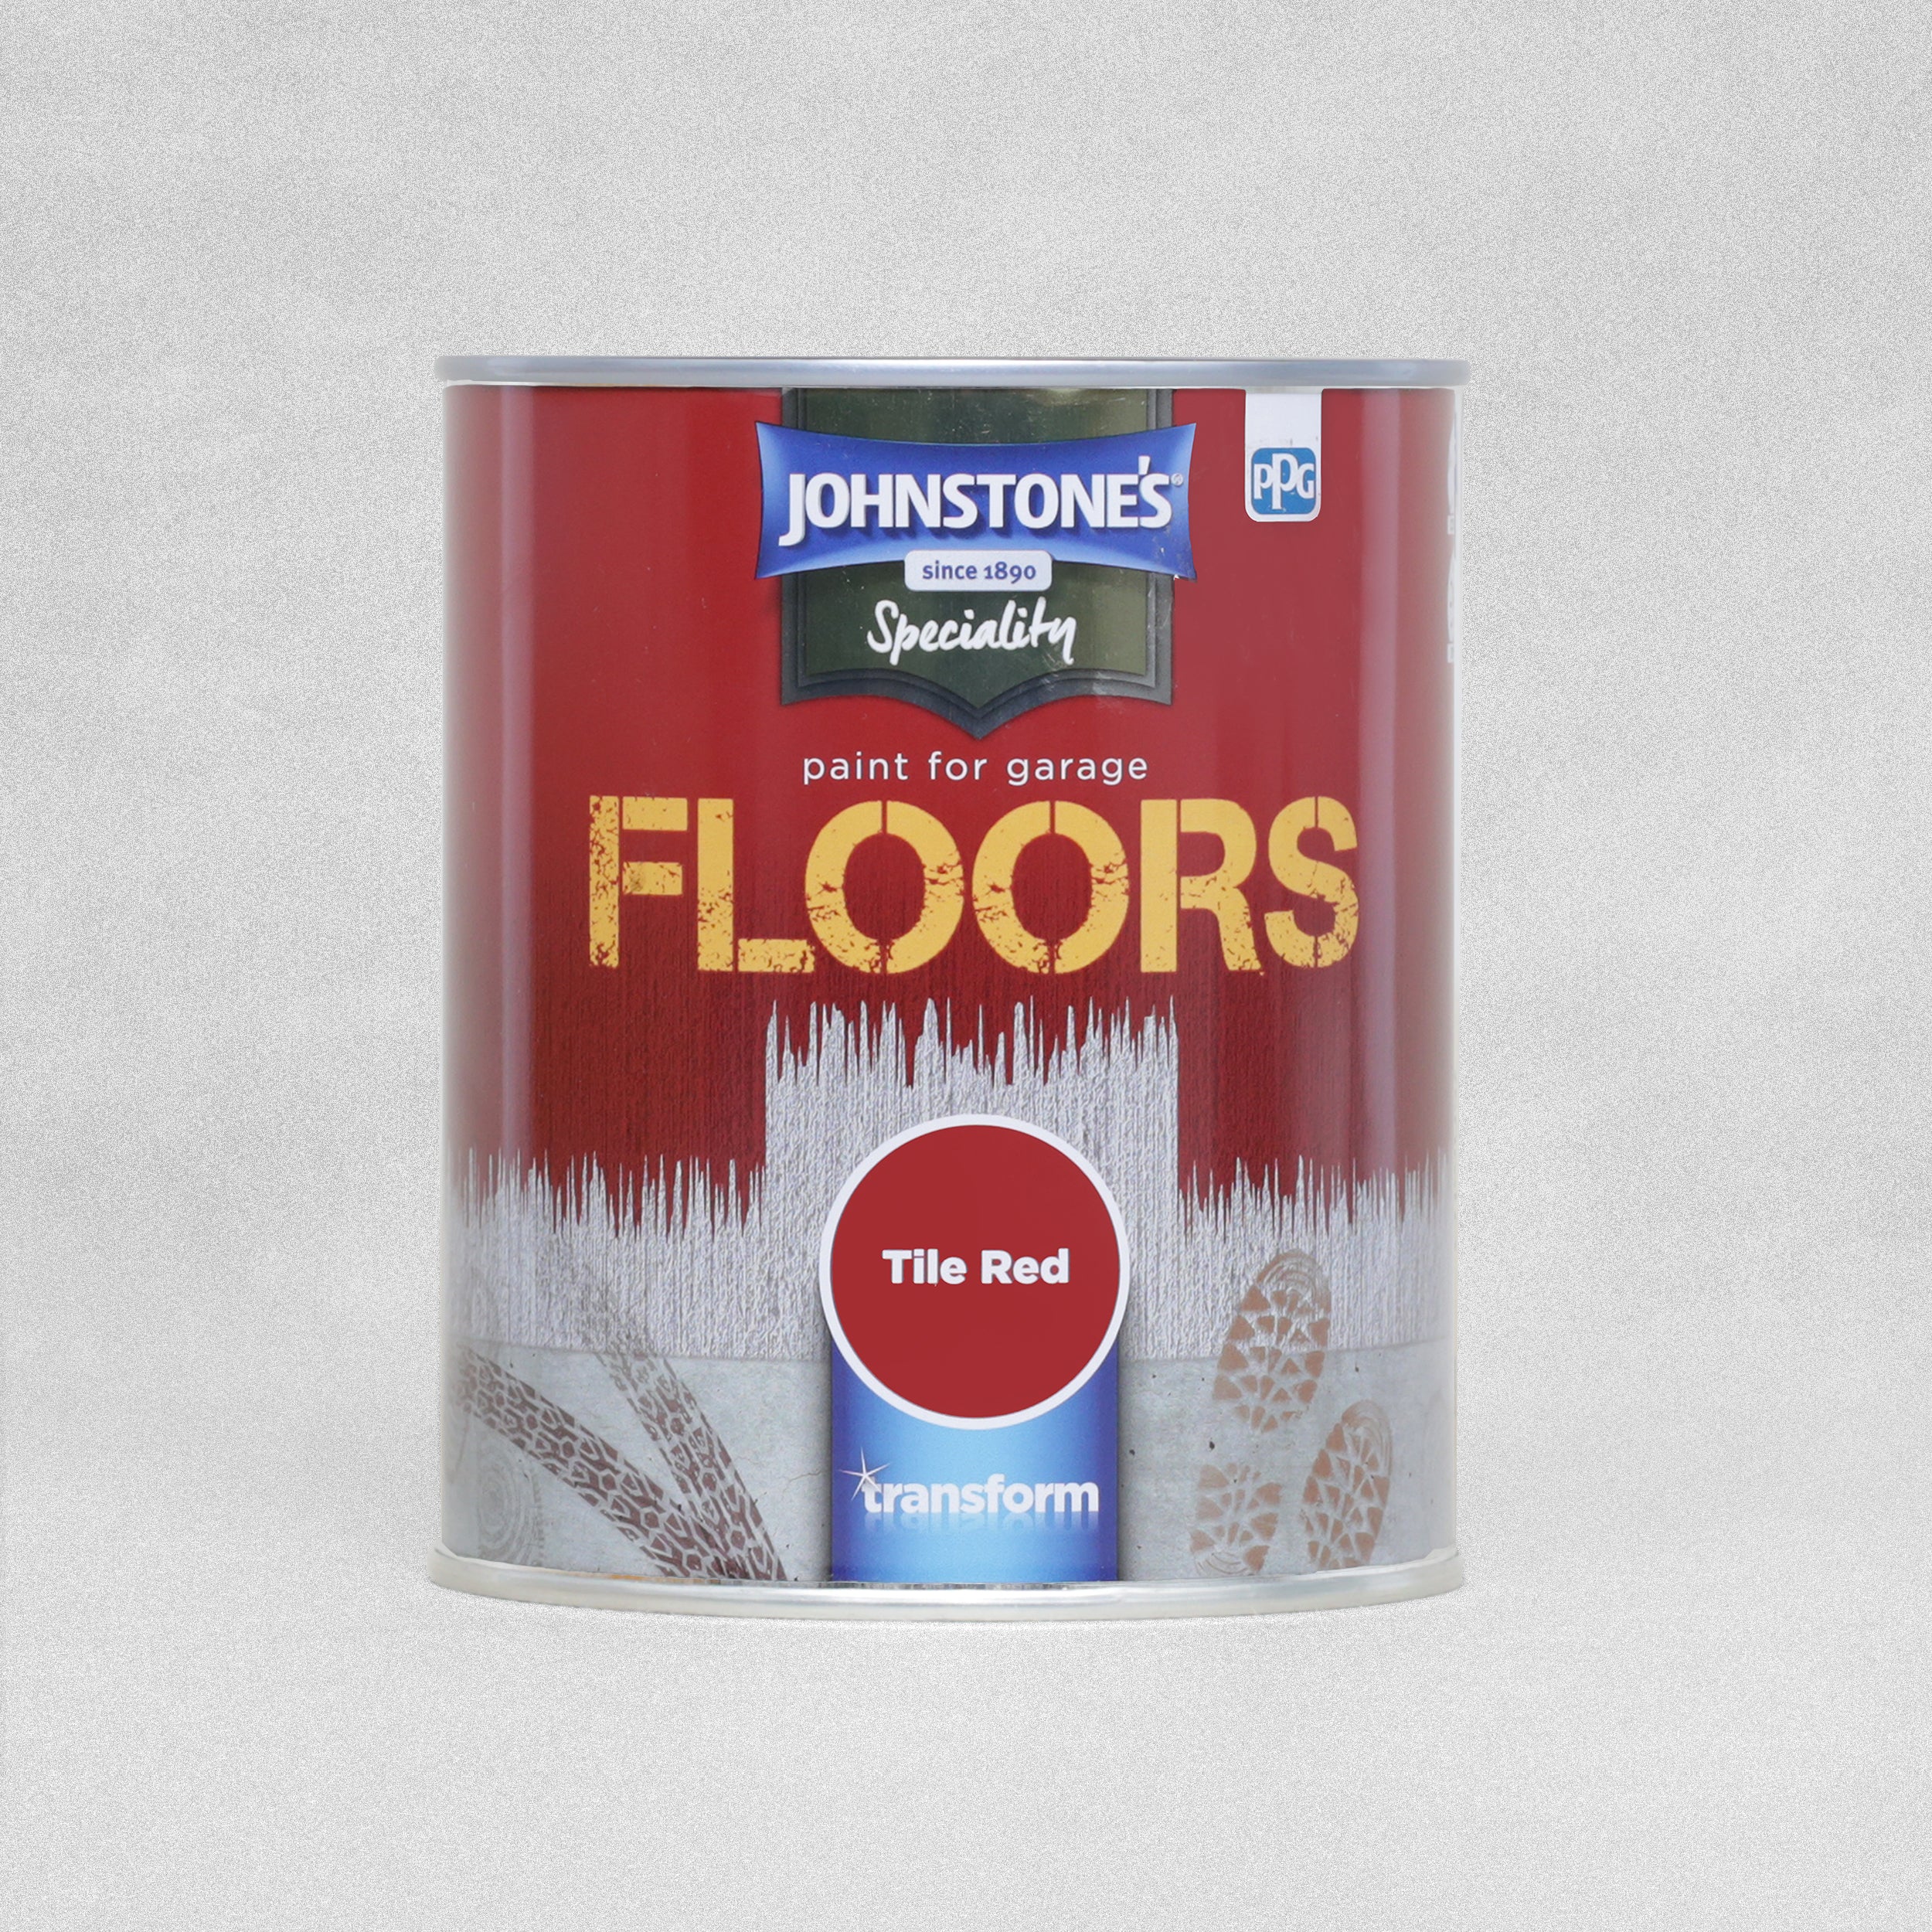 Johnstone's Speciality Paint for Garage Floors Tile Red Paint - 750ml